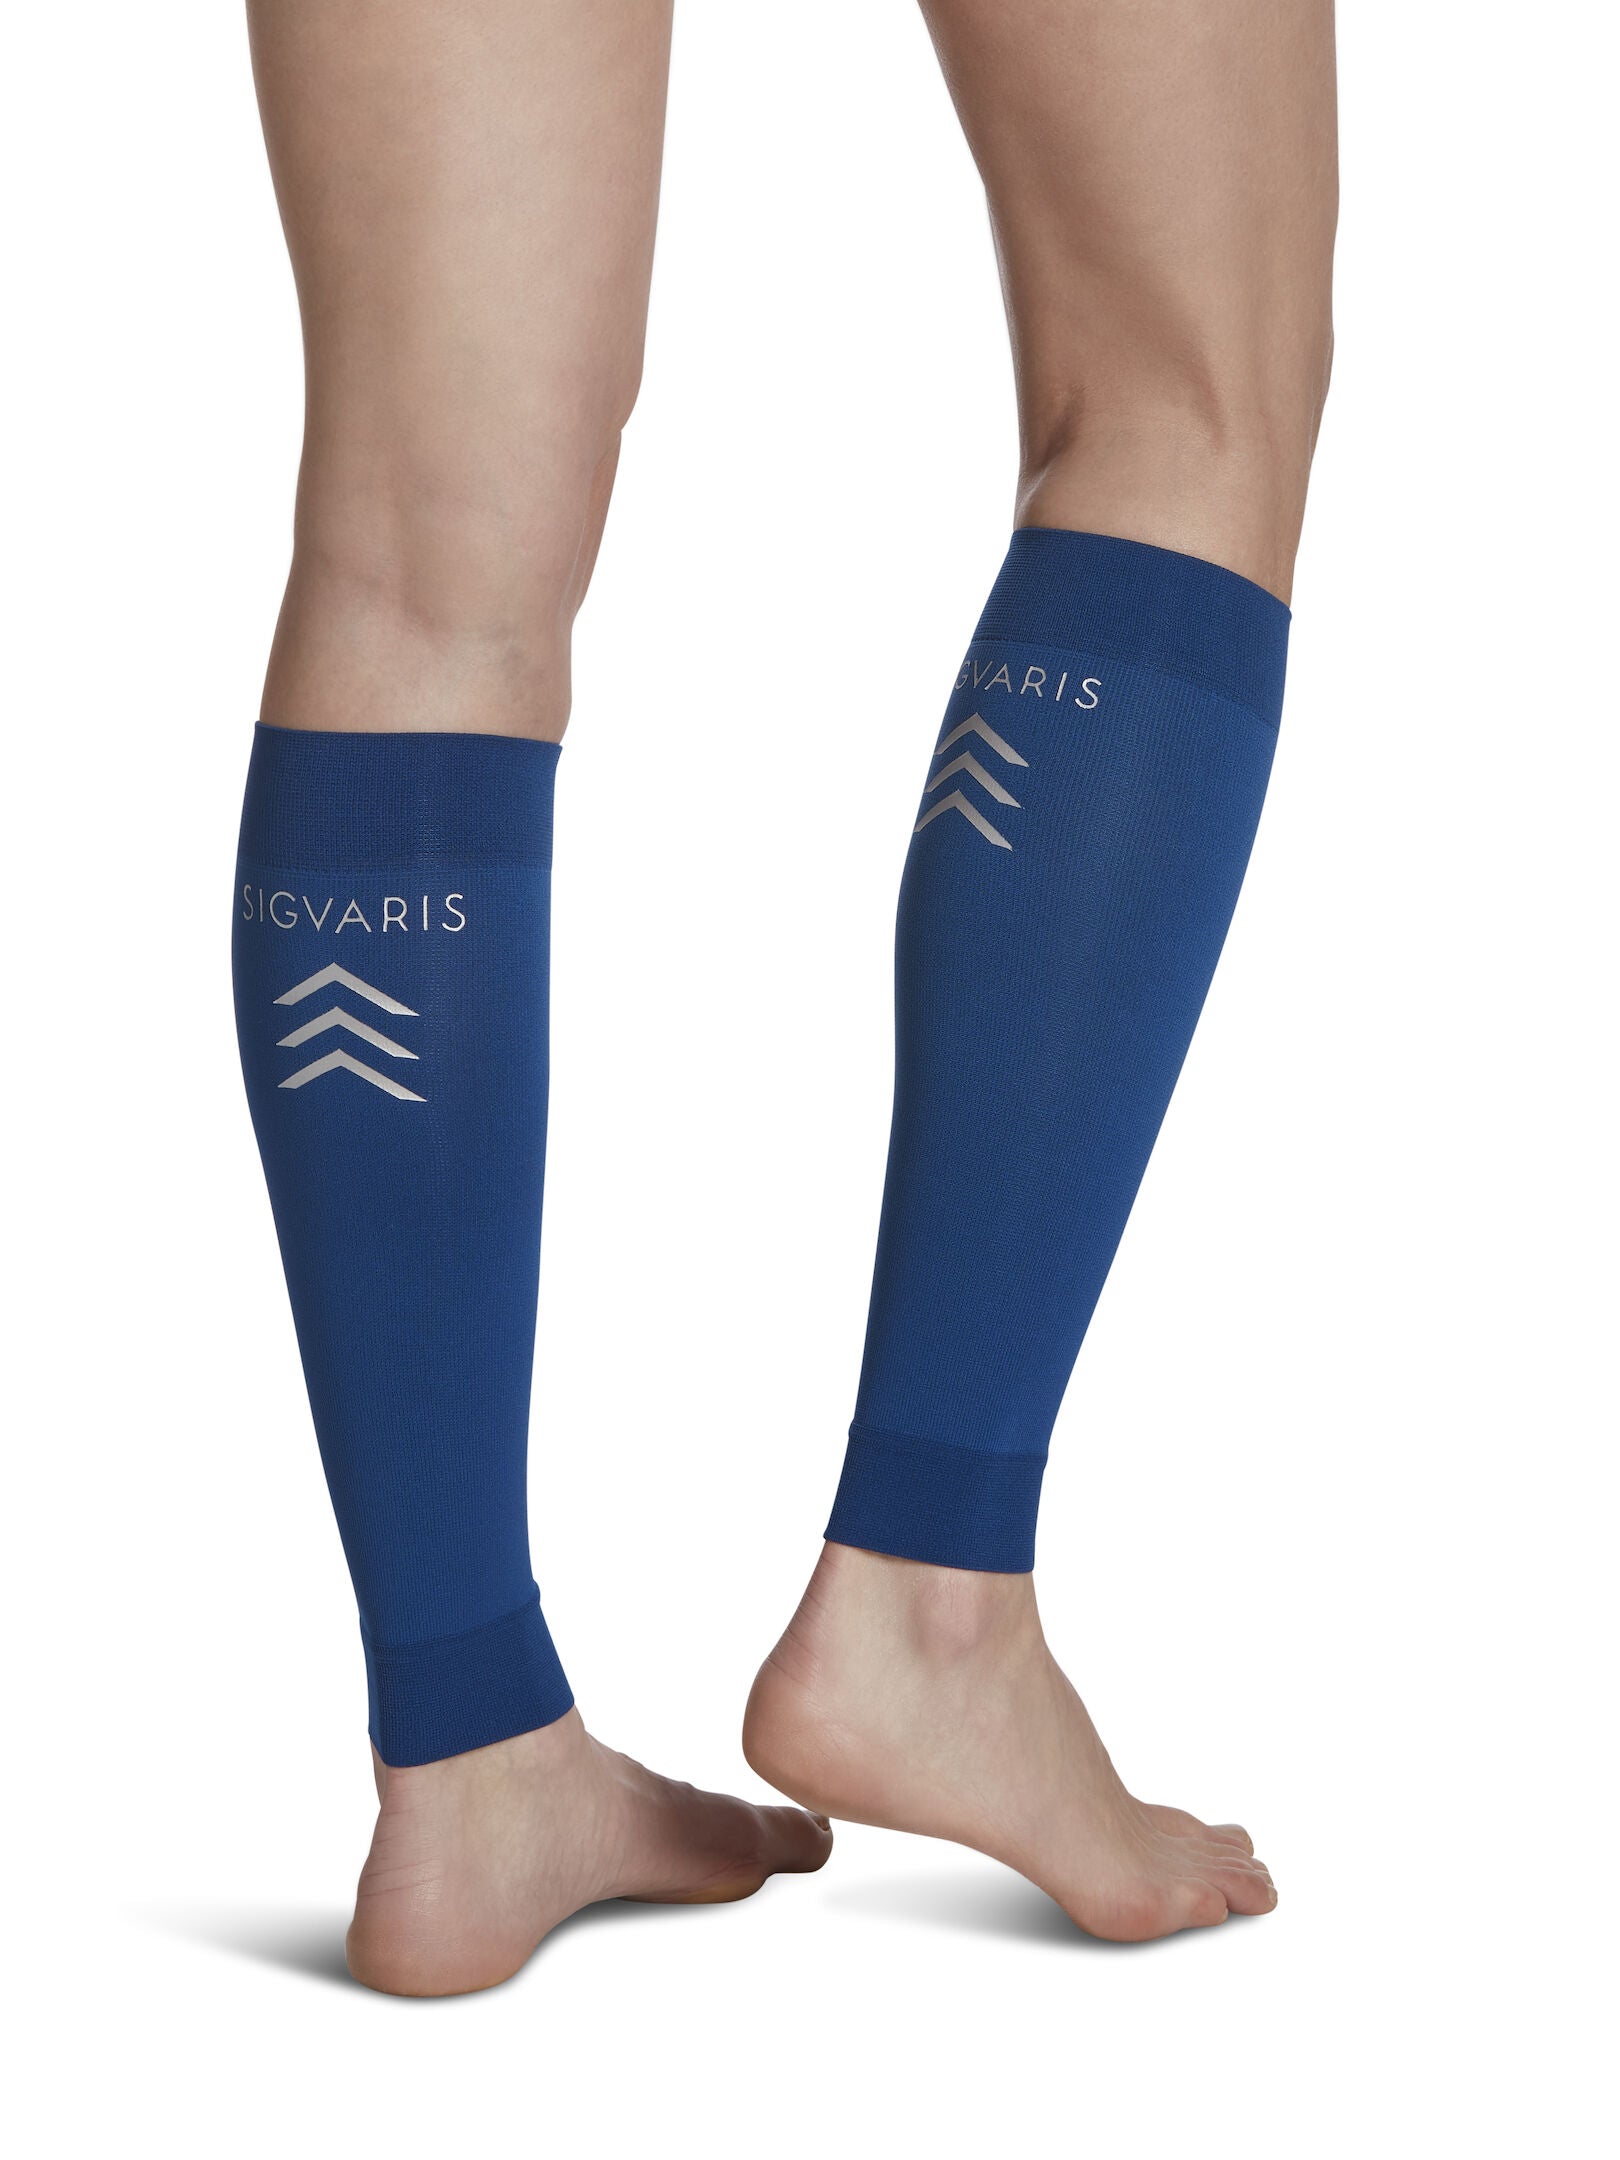 Sigvaris Performance Sleeves Unisex Compression - SoleScience